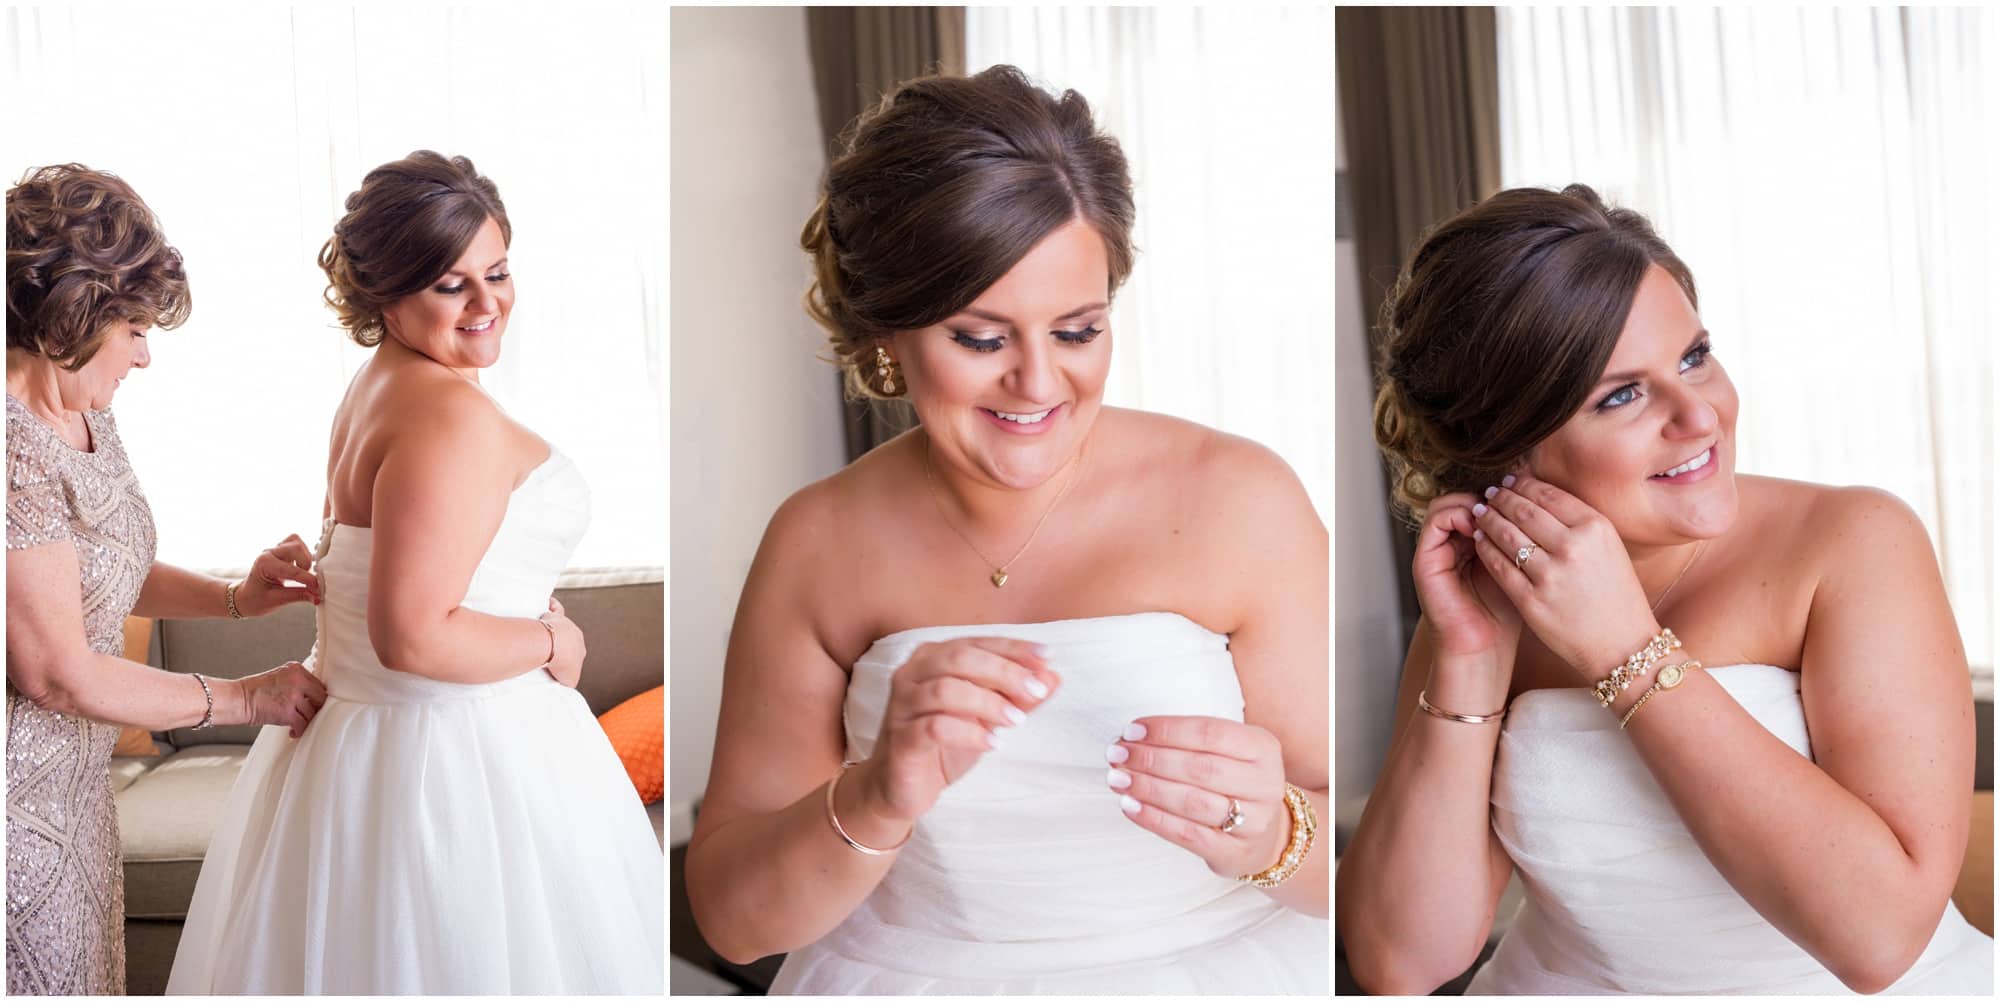 bride getting ready on wedding day, putting dress on with mother and earrings on by herself